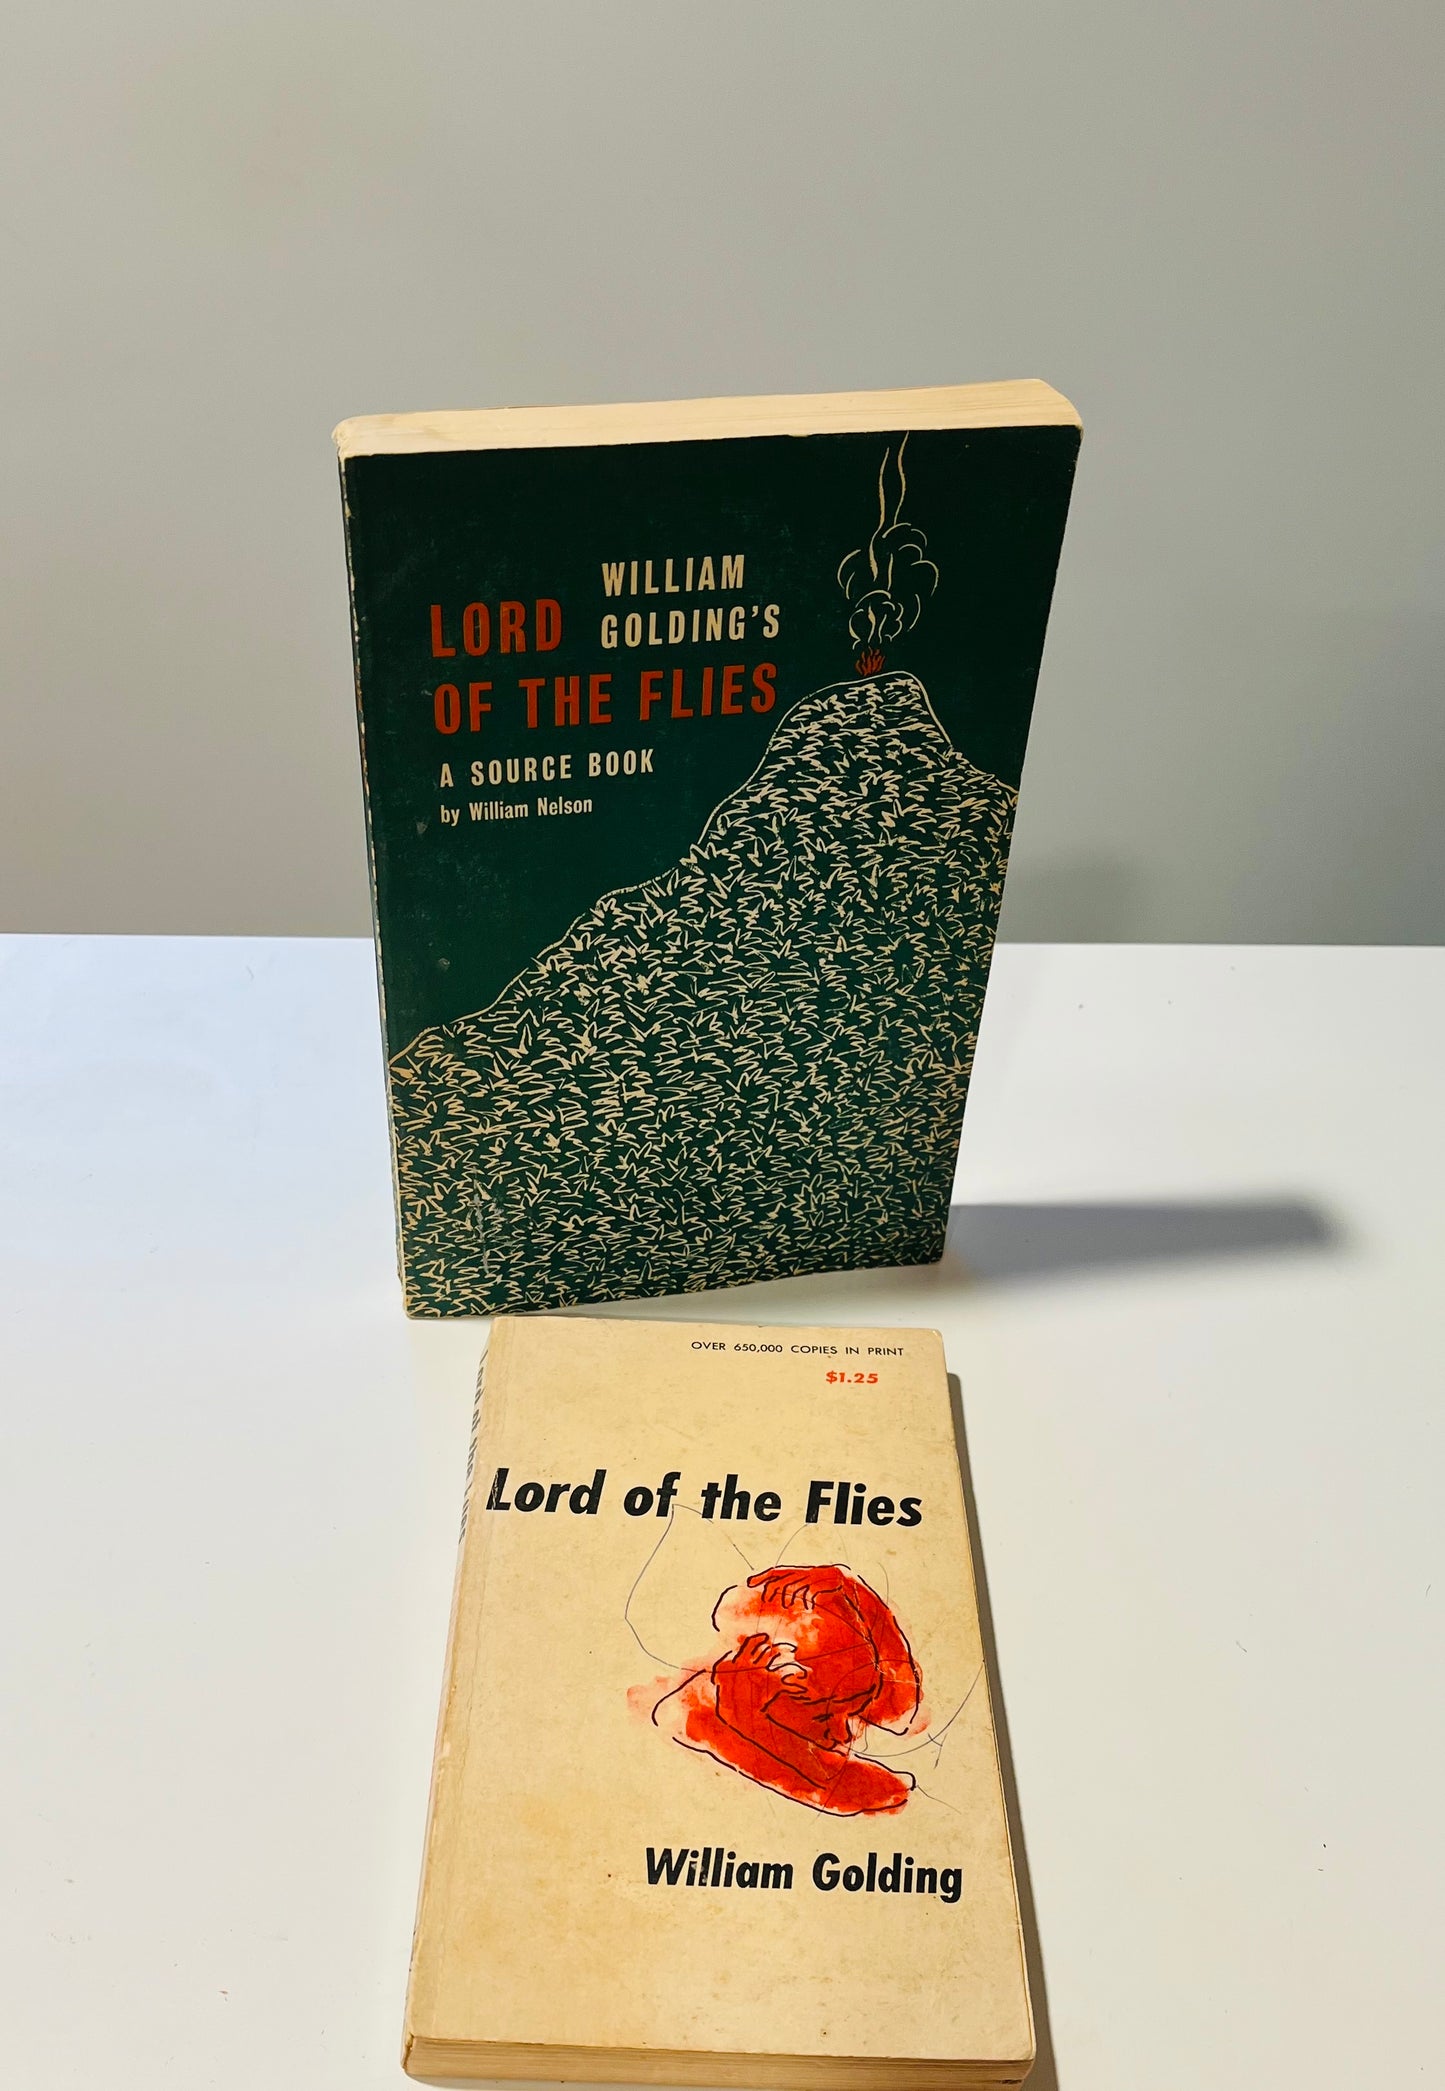 Lord of the Flies (book set)